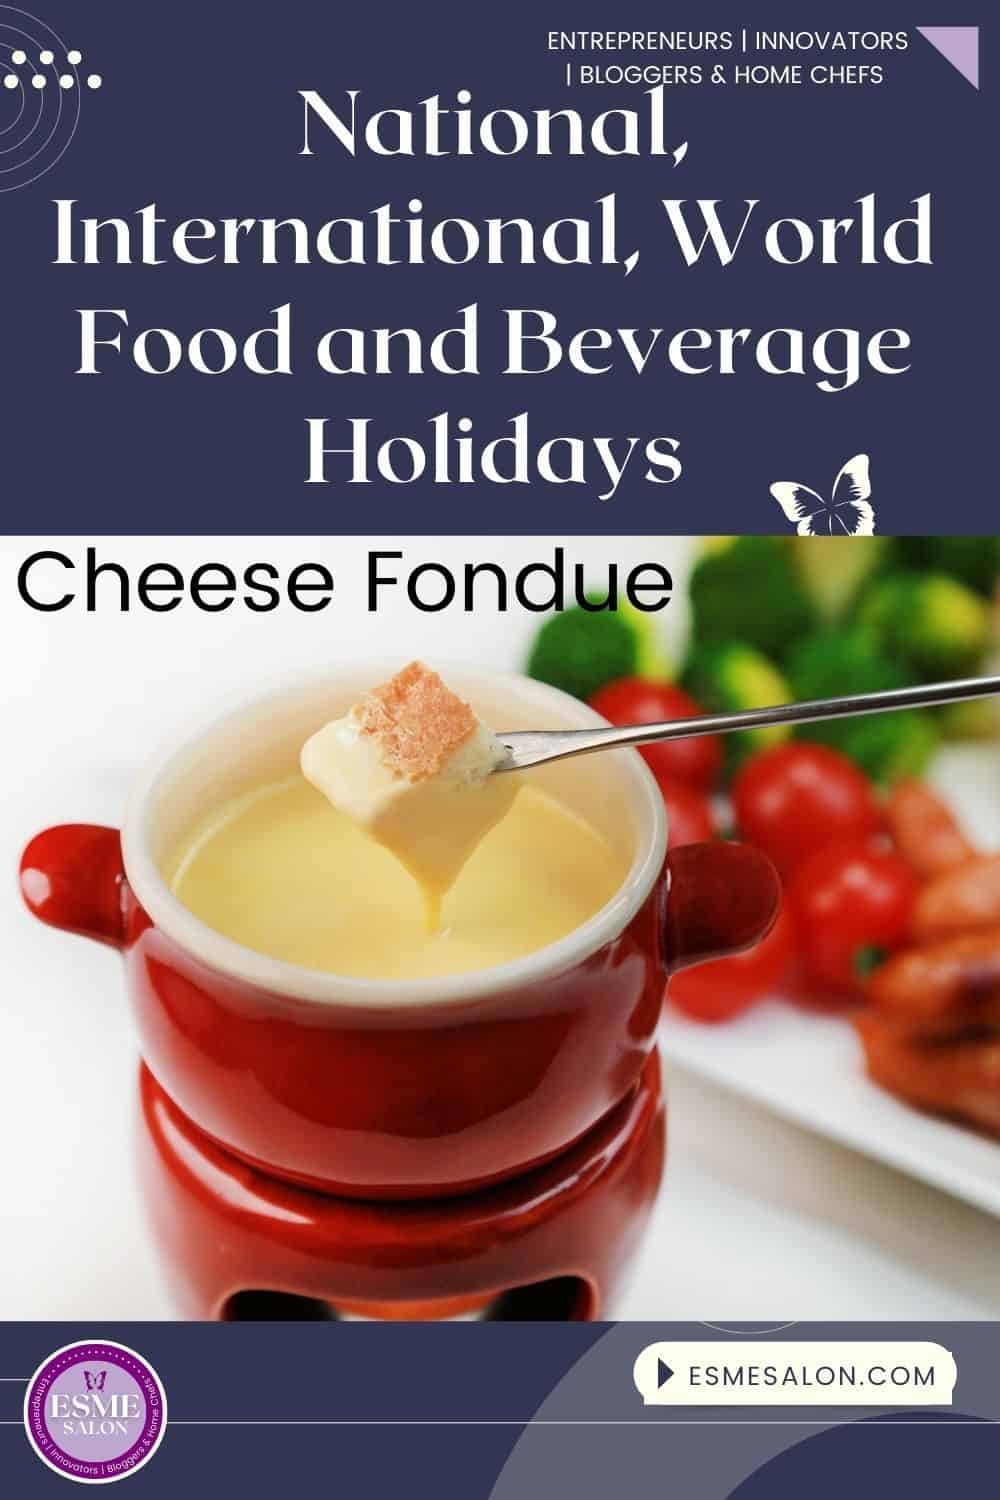 An image of a red fondue pot filled with Cheese Fondue 